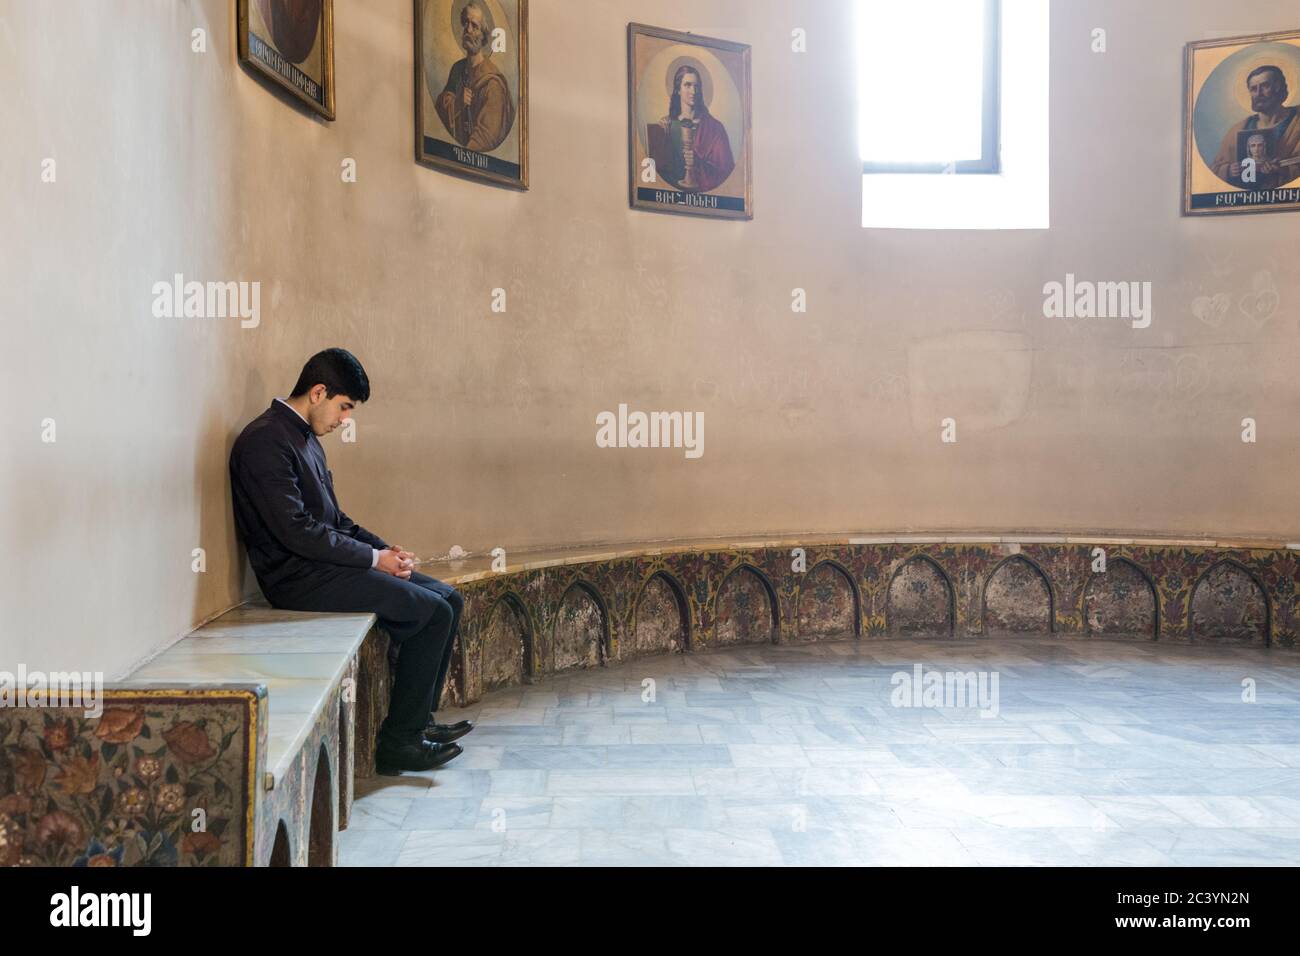 Man Waiting Mural High Resolution Stock Photography and Images - Alamy